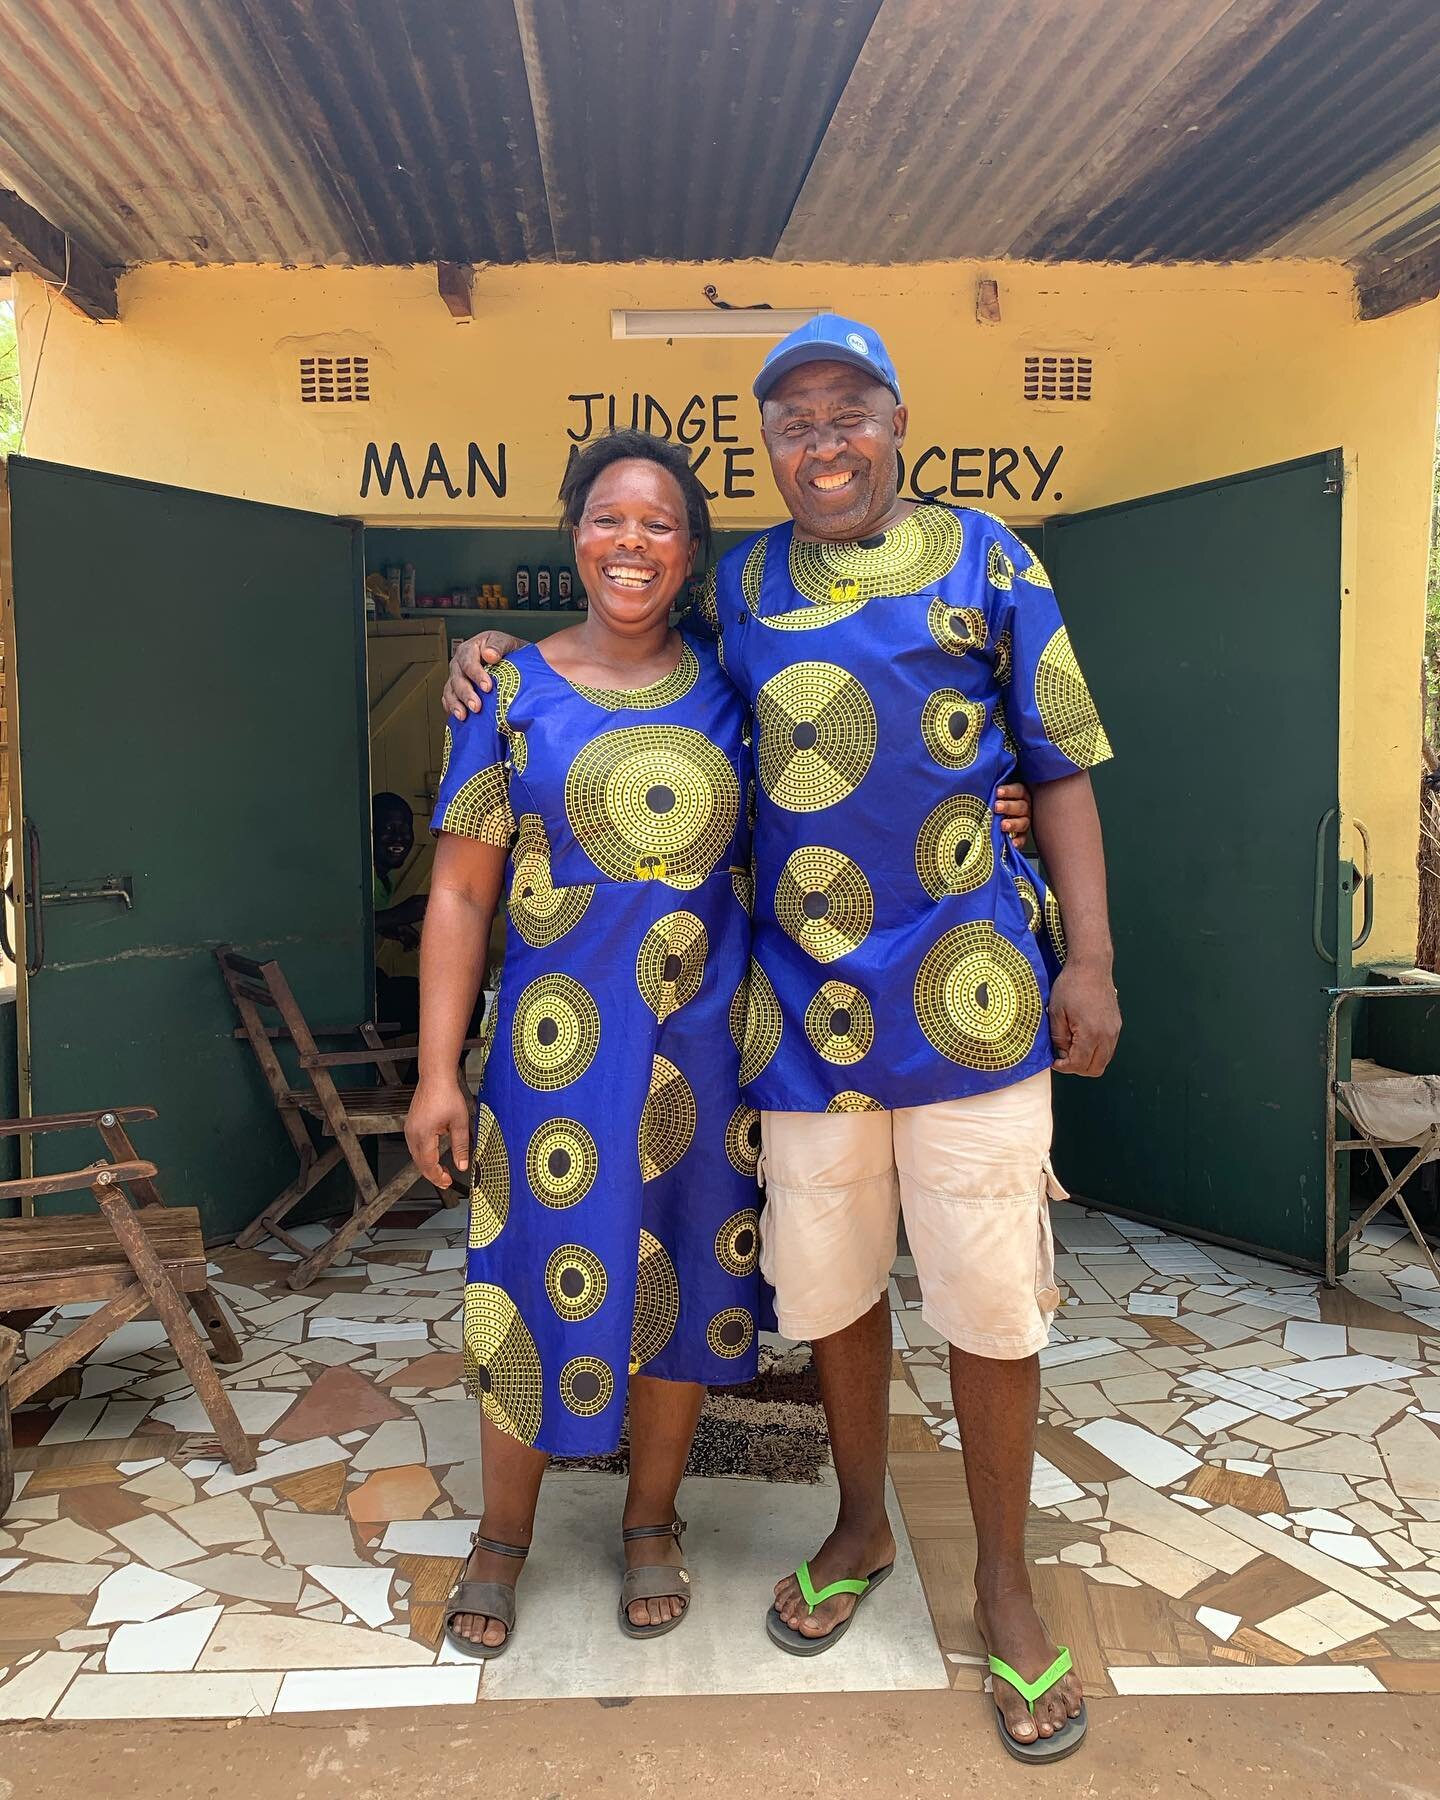 Kunganda | On Monday morning, we visited Chuma, one of our tailors, at her home in Simonga.  Her and her husband were sporting matching outfits that she made during one of the free sessions last year. Other than being a skilled tailor, Chuma is a sma